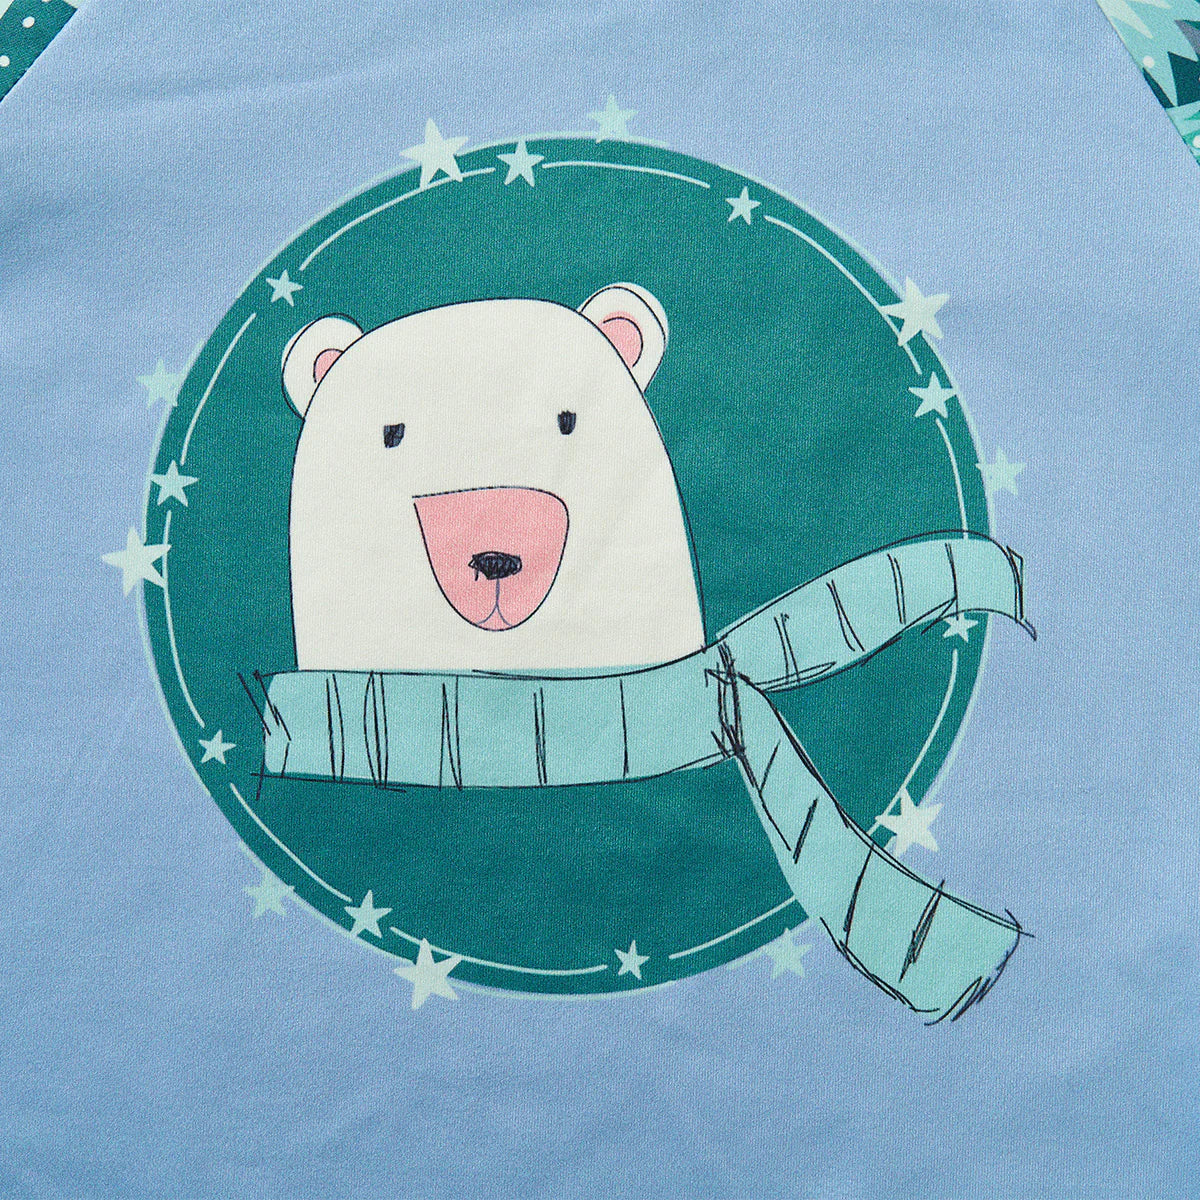 (Preorder) Polar Paws Shirt by Pete + Lucy